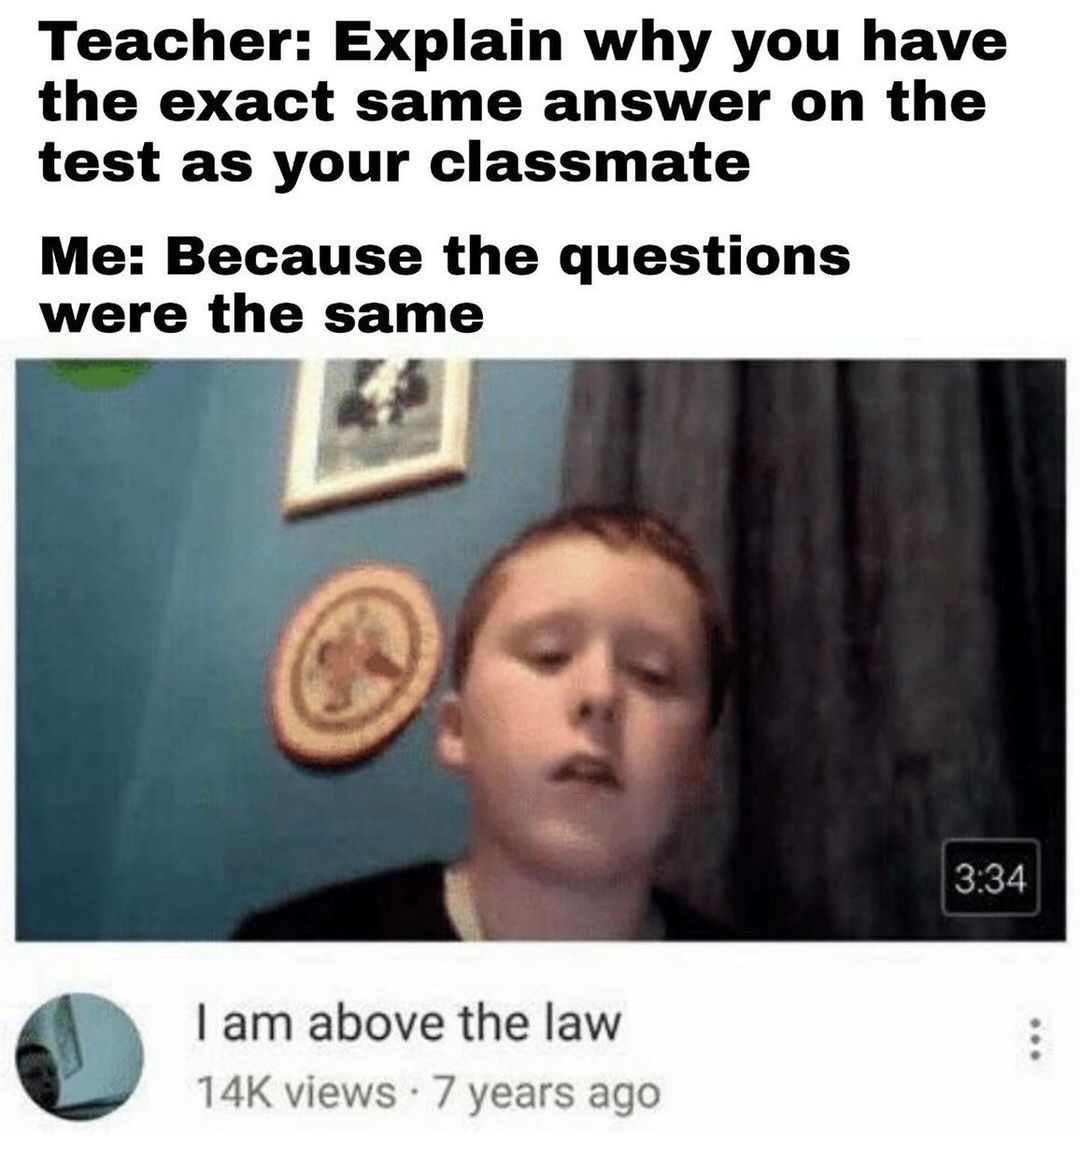 dank memes - Teacher Explain why you have the exact same answer on the test as your classmate Me Because the questions were the same I am above the law 14K views 7 years ago